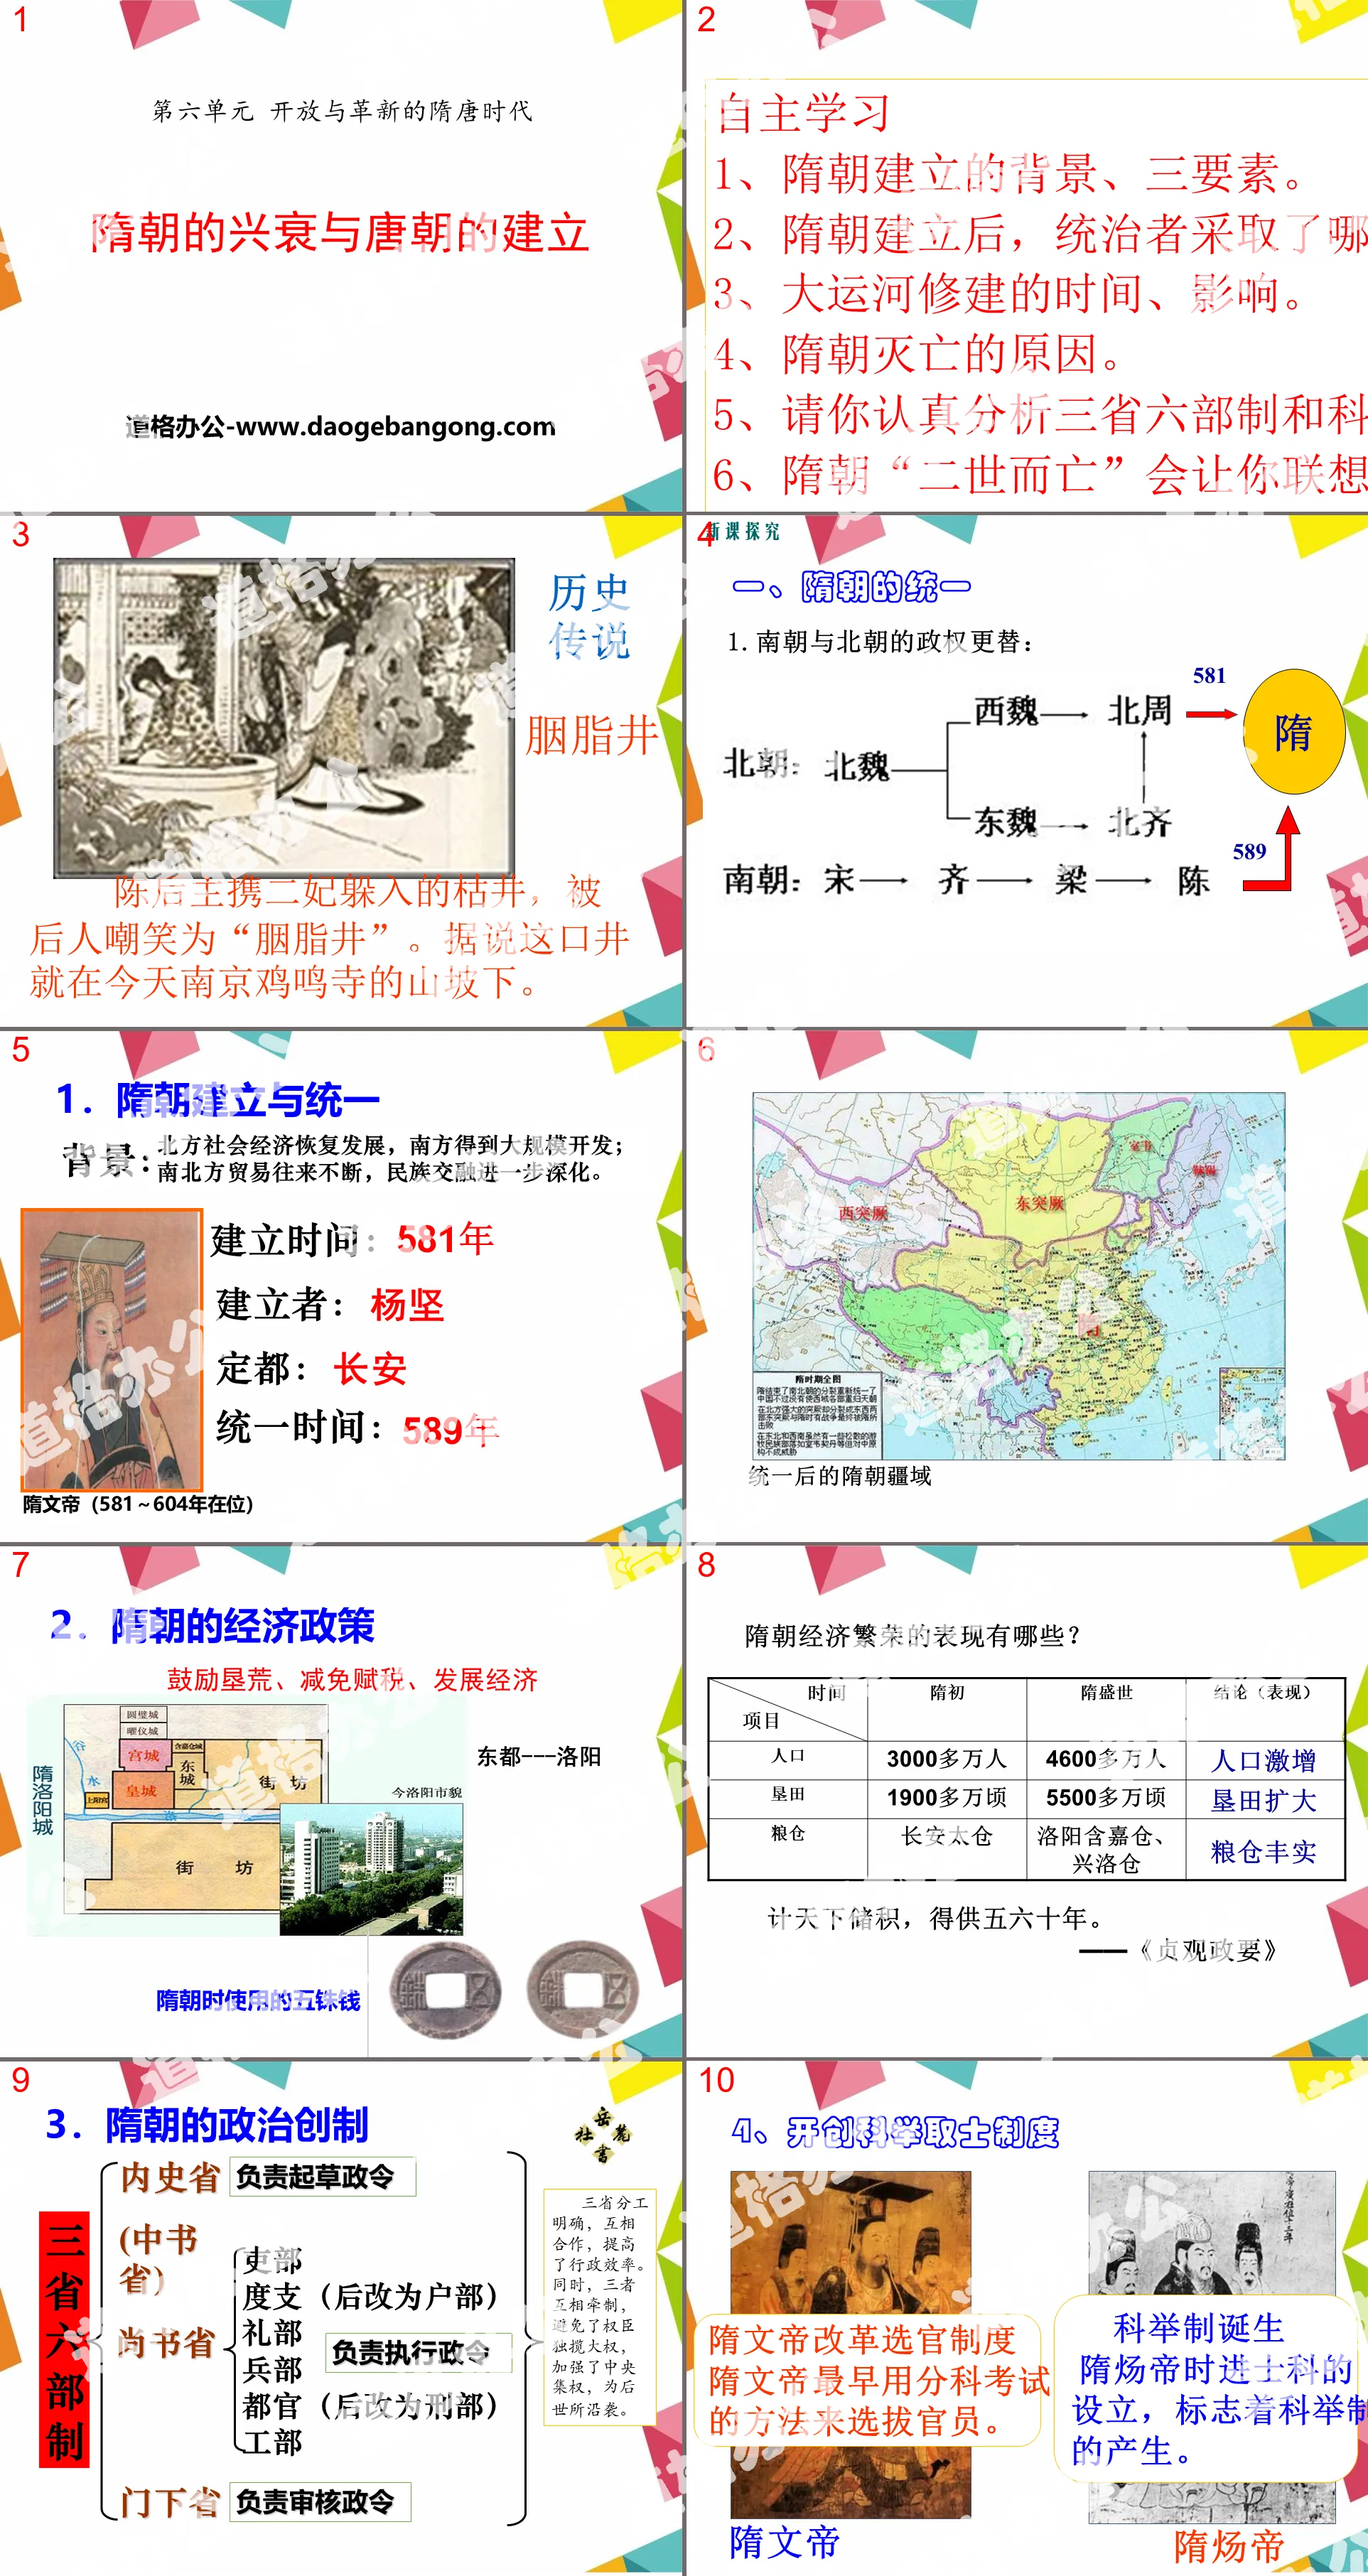 "The Rise and Fall of the Sui Dynasty and the Establishment of the Tang Dynasty" PPT courseware 4 in the open and innovative Sui and Tang Dynasties